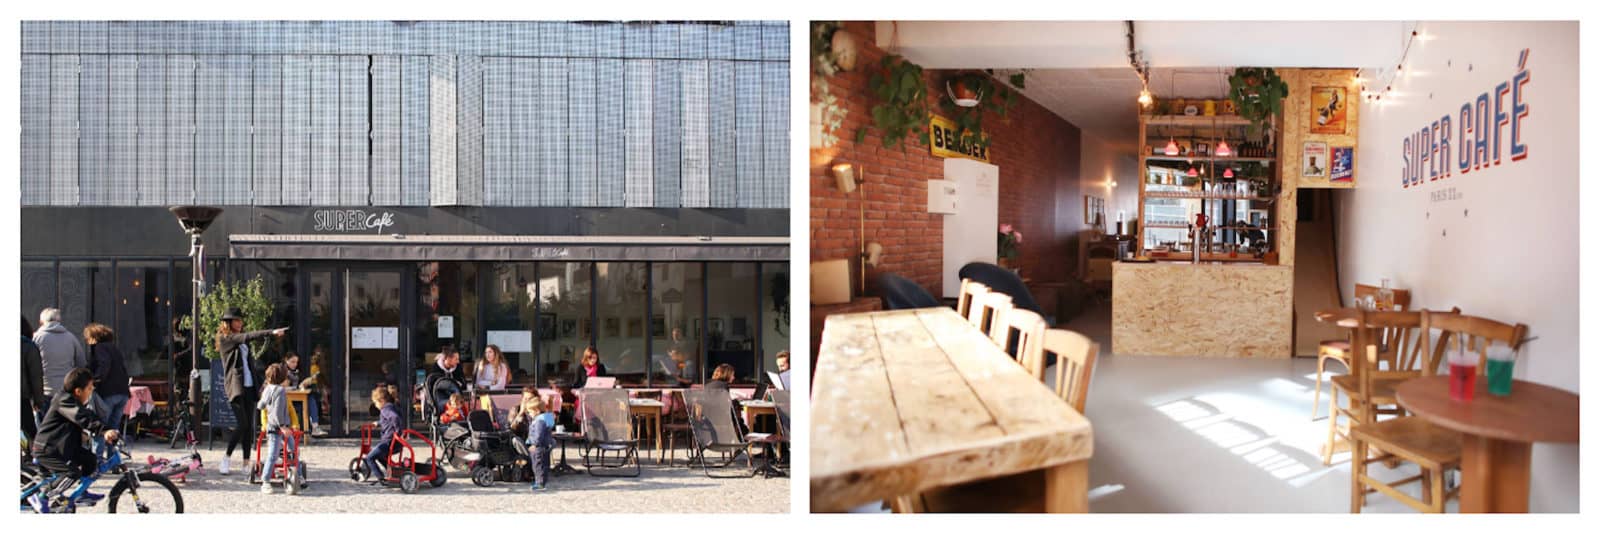 Brunch in Paris at Super Café which comes with a tricycle-friendly outdoor area (left) and plenty space to play inside (right).